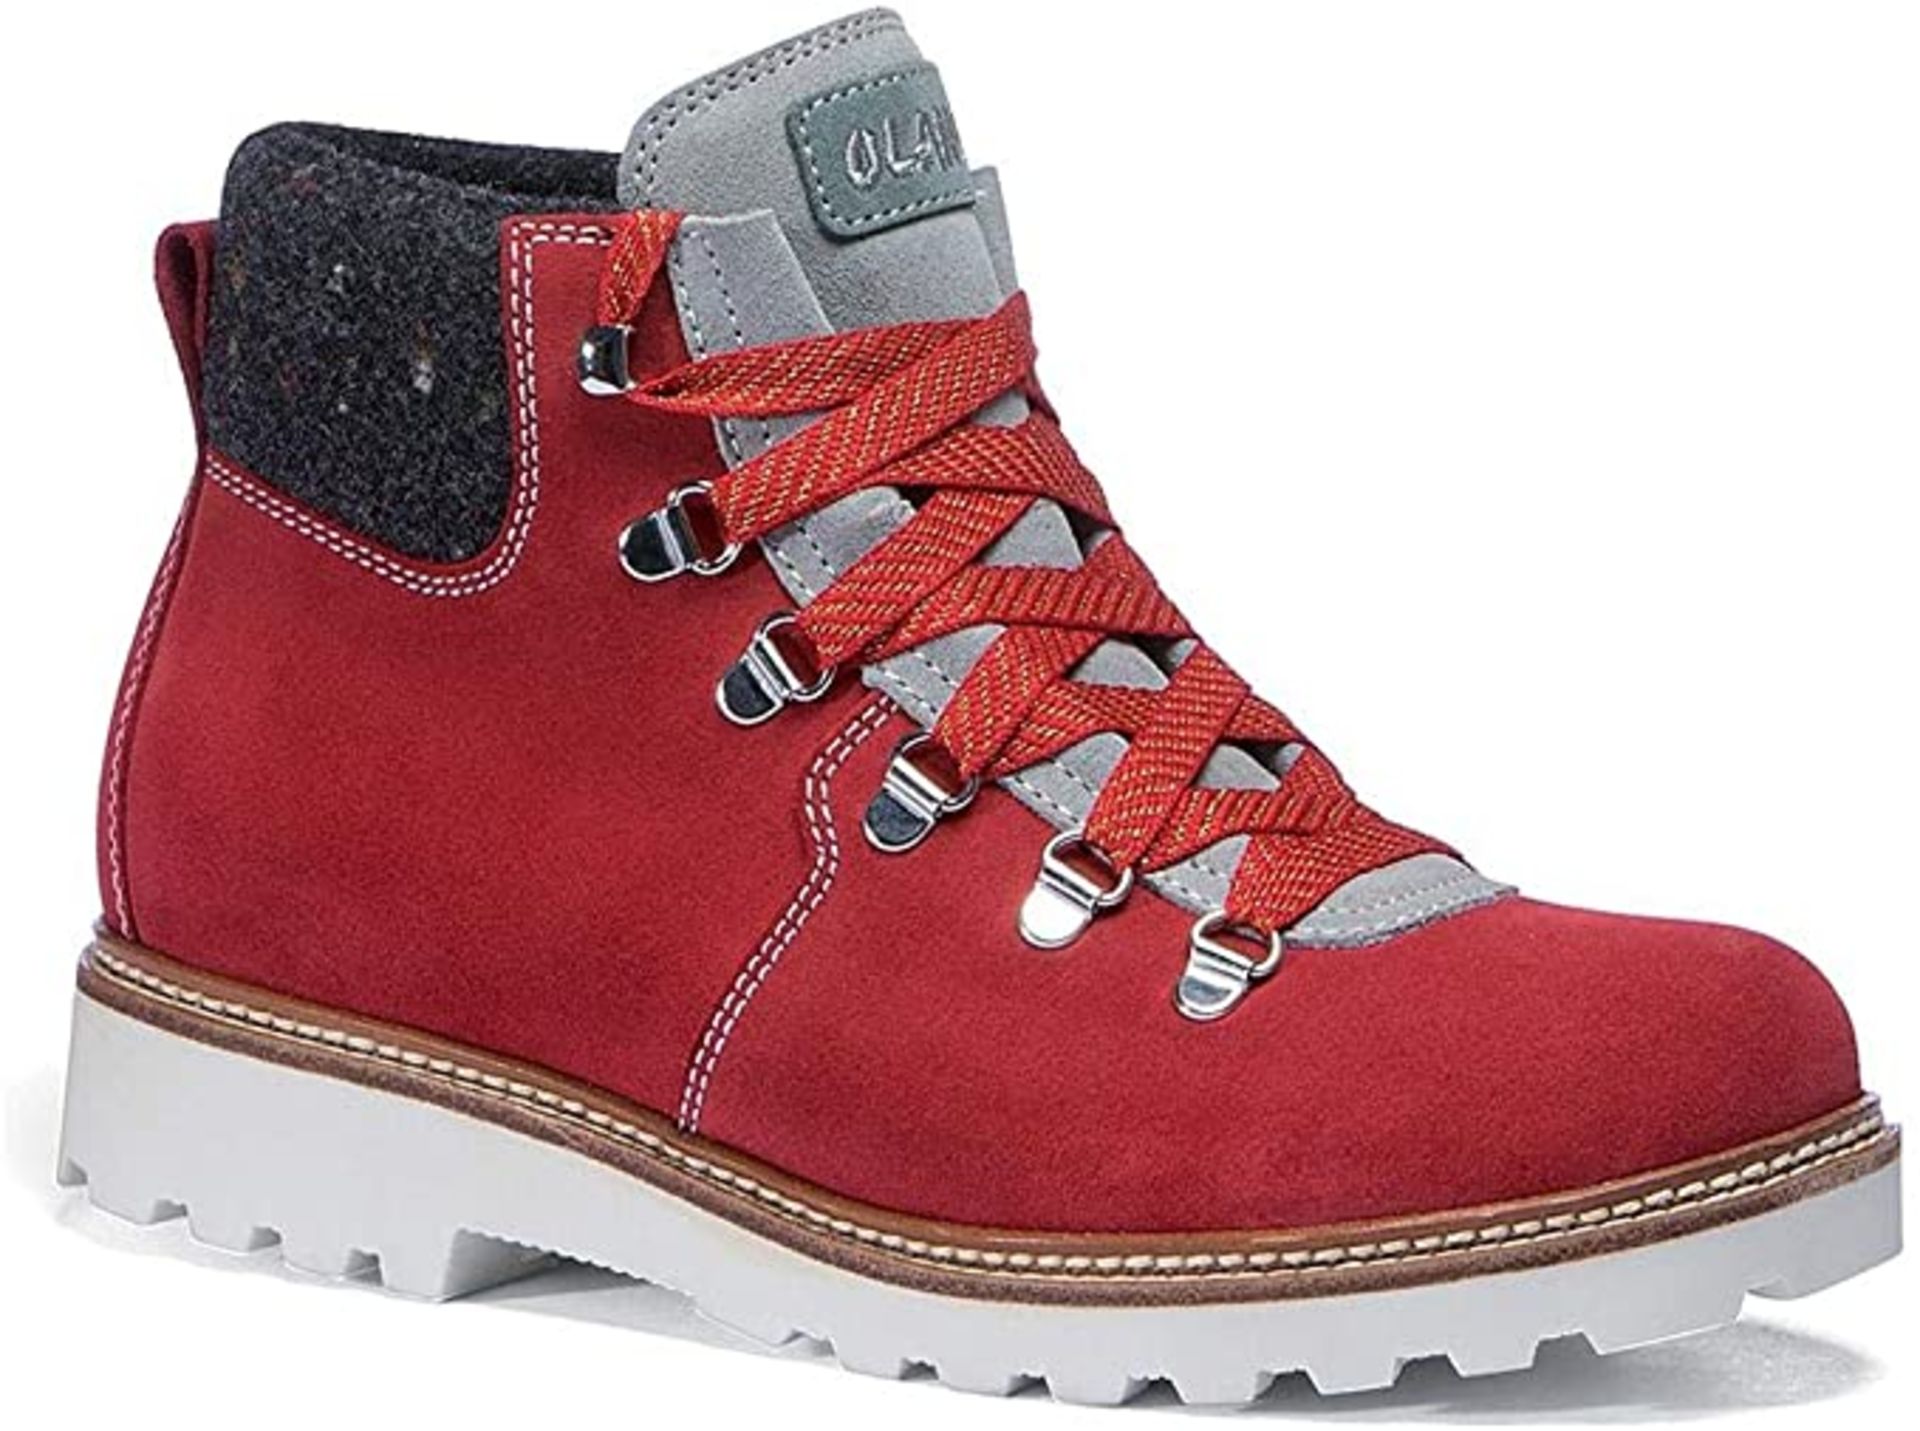 1 x Pair of Designer Olang Merano BTX 815 Rosso Women's Winter Boots - Euro Size 37 - Brand New - Image 4 of 4